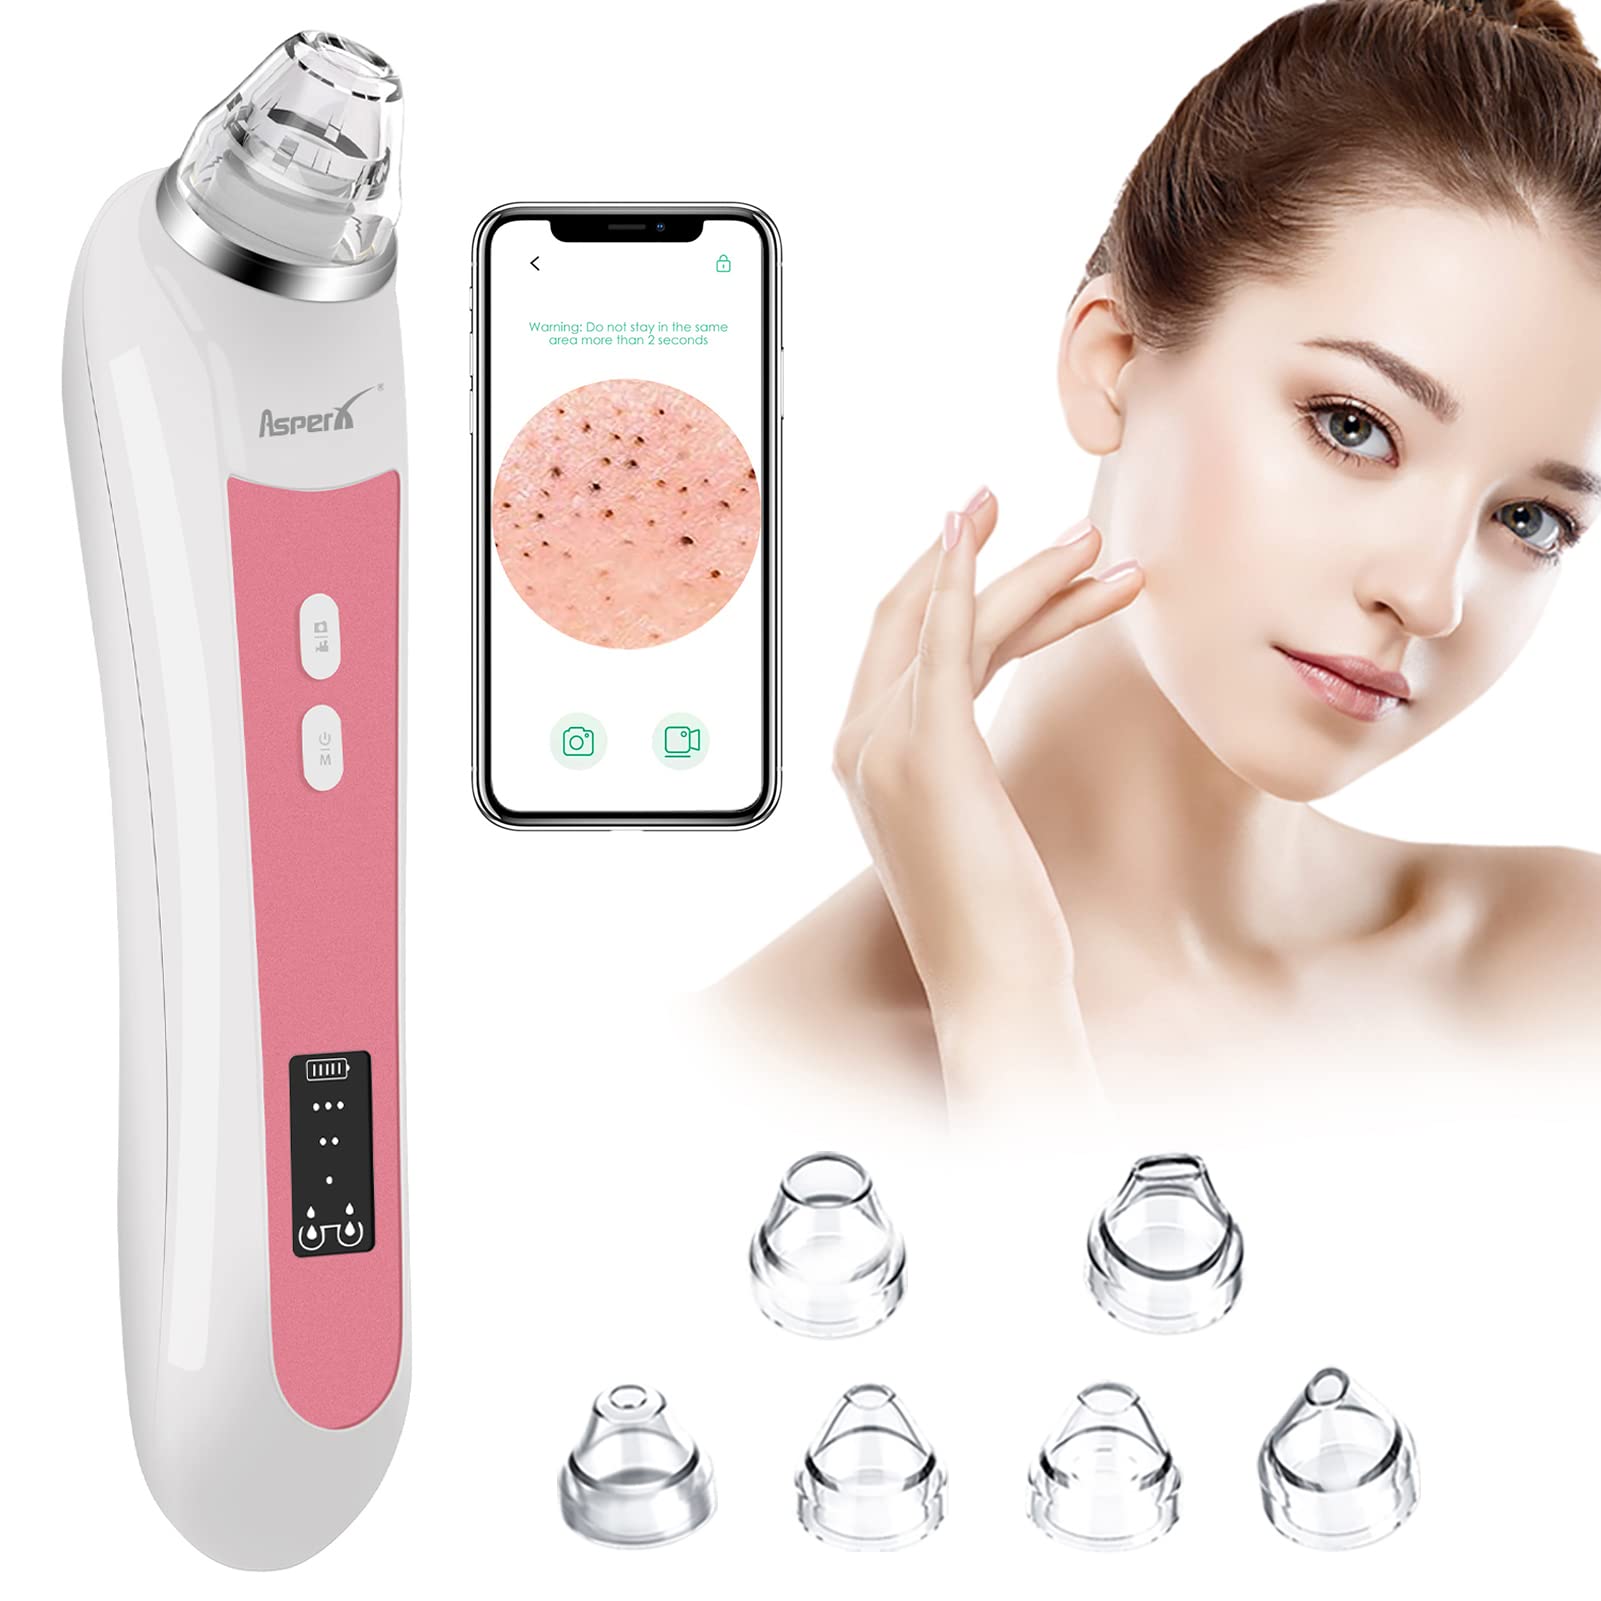 Blackhead Remover Pore Vacuum, AsperX WiFi Visible Facial Pore Cleaner Pimple Sucker with HD Camera Acne Comedone Extractor with 6 Suction Heads Electric Blackhead Remover Tools